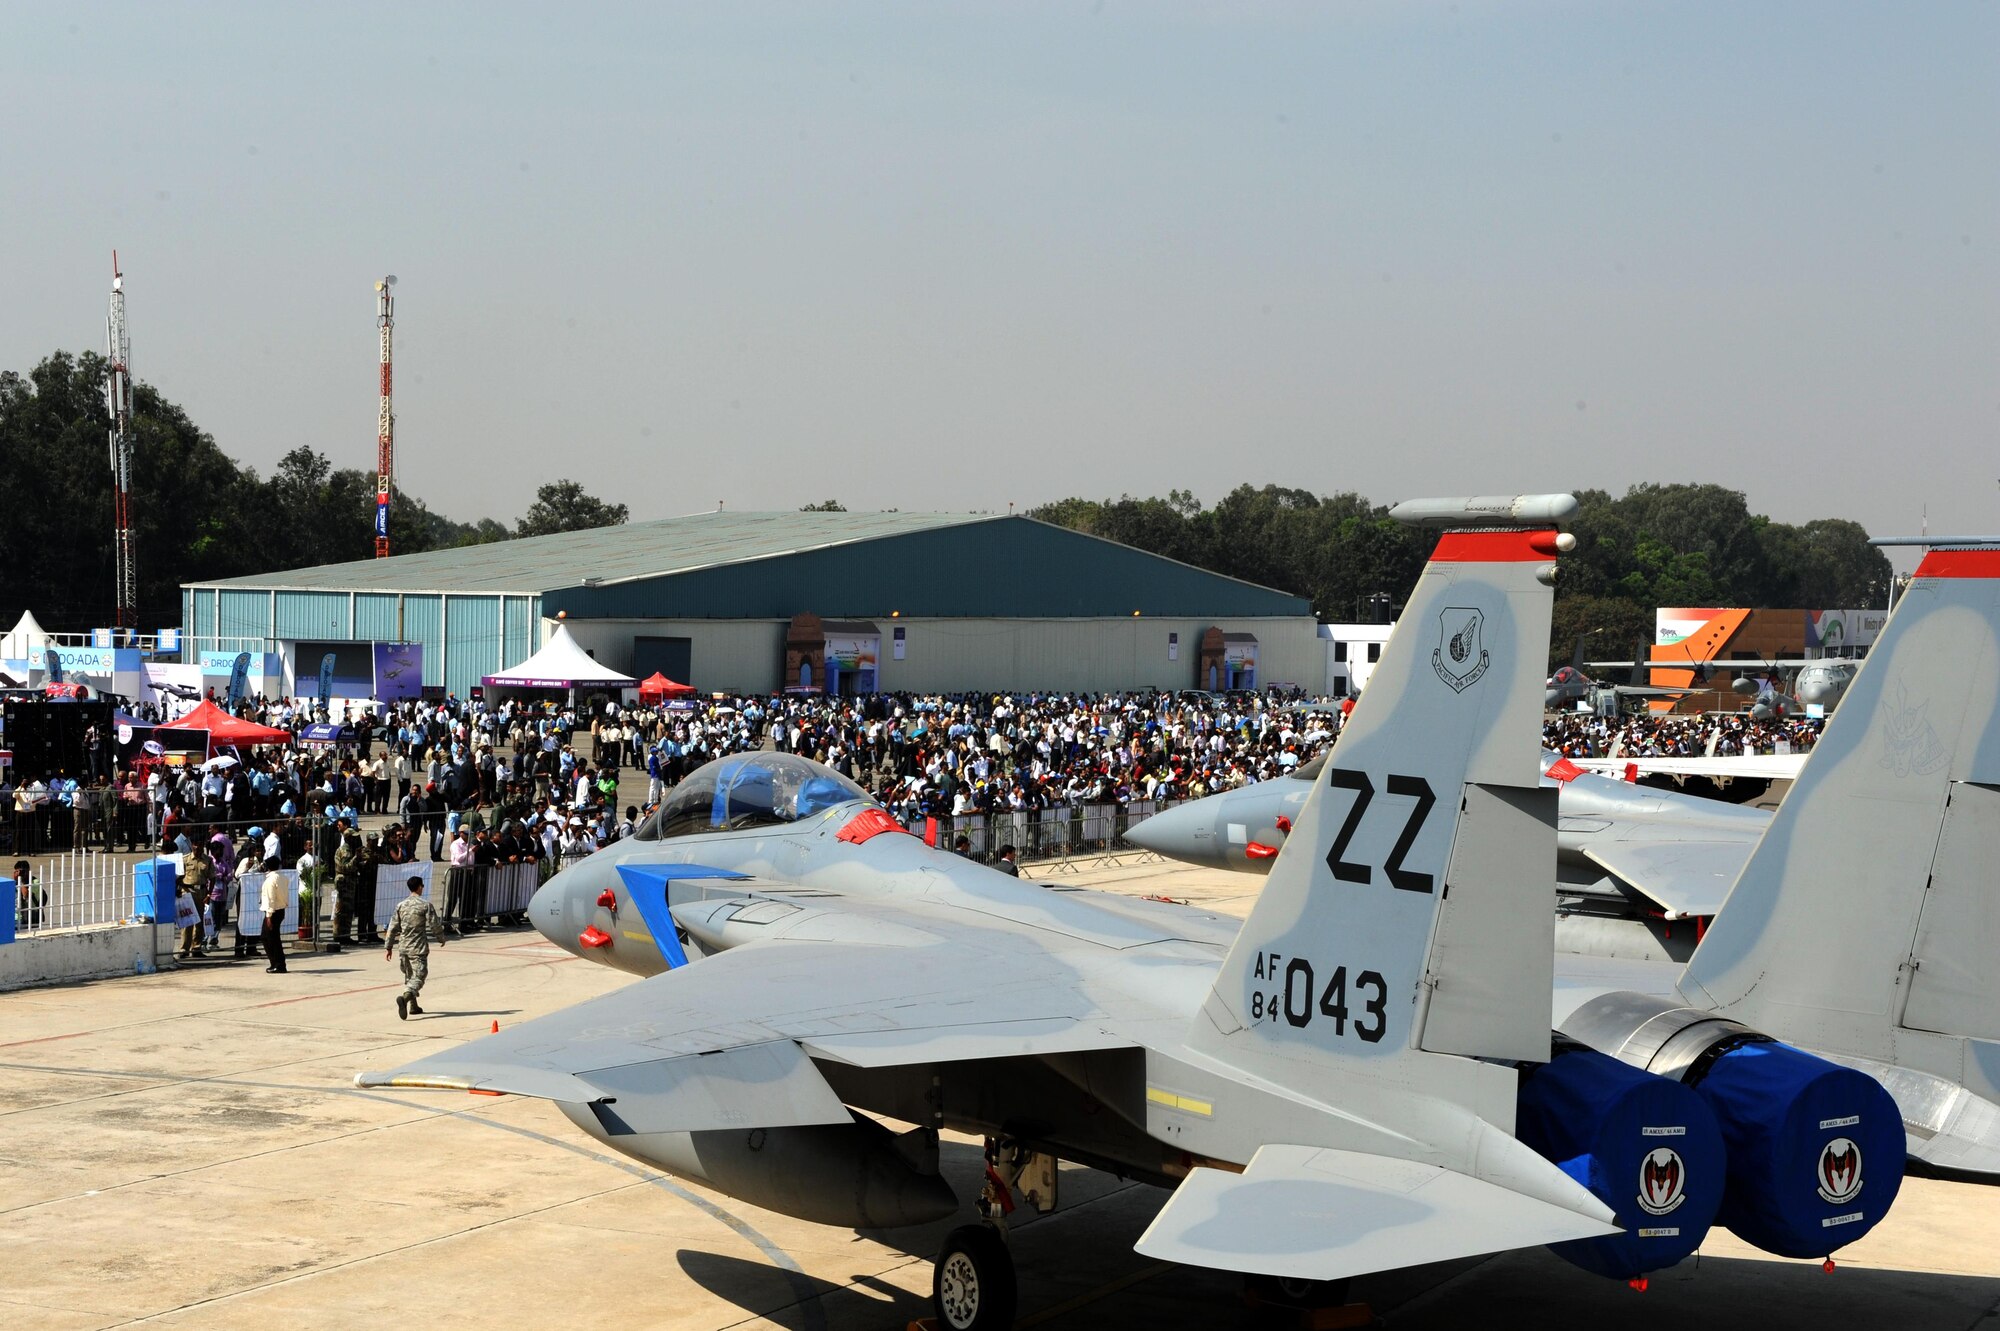 Two F-15 Eagle sit on static display during Aero India 15, Feb. 19, 2015, at Air Force Station Yelahanka in Bengaluru, India. The F-15s are assigned to the 44th Fighter Squadron at Kadena Air Base, Japan. Aero India is India's premier aerospace exhibition and airshow and allowed the U.S. to demonstrate its commitment to the security of the Indo-Asia-Pacific region and showcase defense aircraft and equipment, which ultimately contributes toward better regional cooperation and tactical compatibility with other countries. This year marks the 10th iteration of Aero India since its inception in 1996.  (U.S. Air Force photo/Airman 1st Class Stephen G.Eigel)